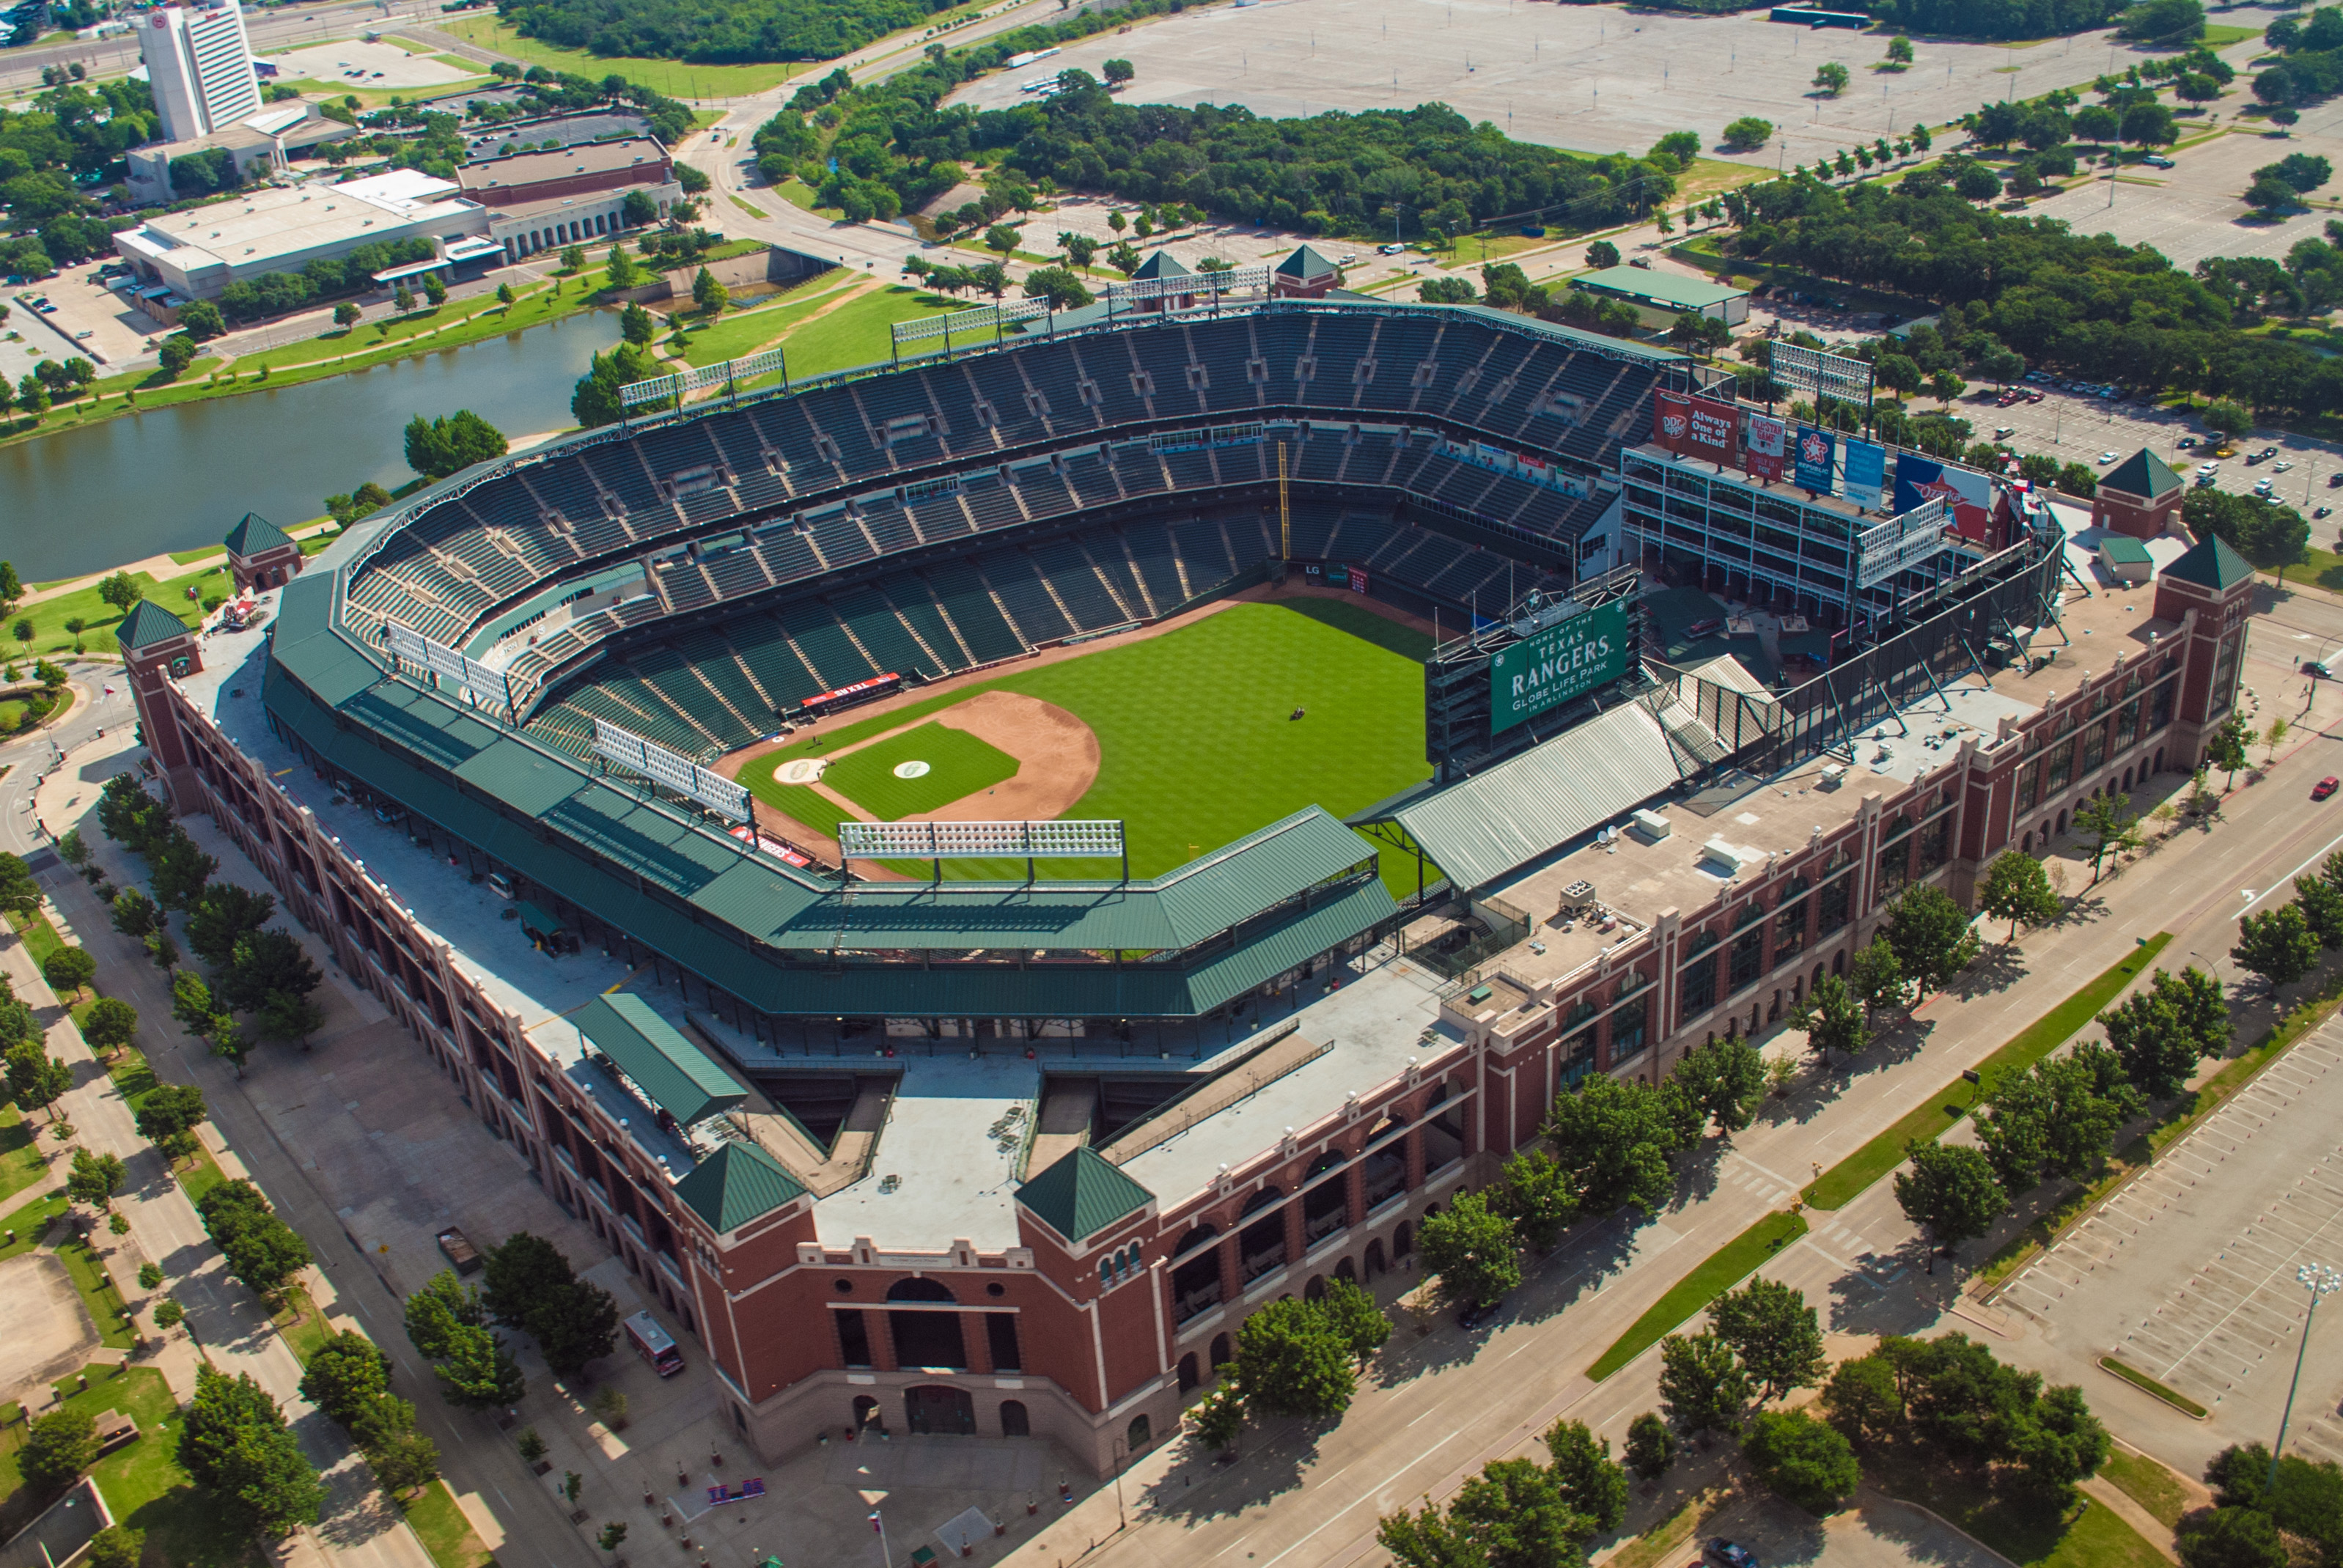 The current Globe Life Park, originally know as the Ballpark in Arlington, opened in 1994.